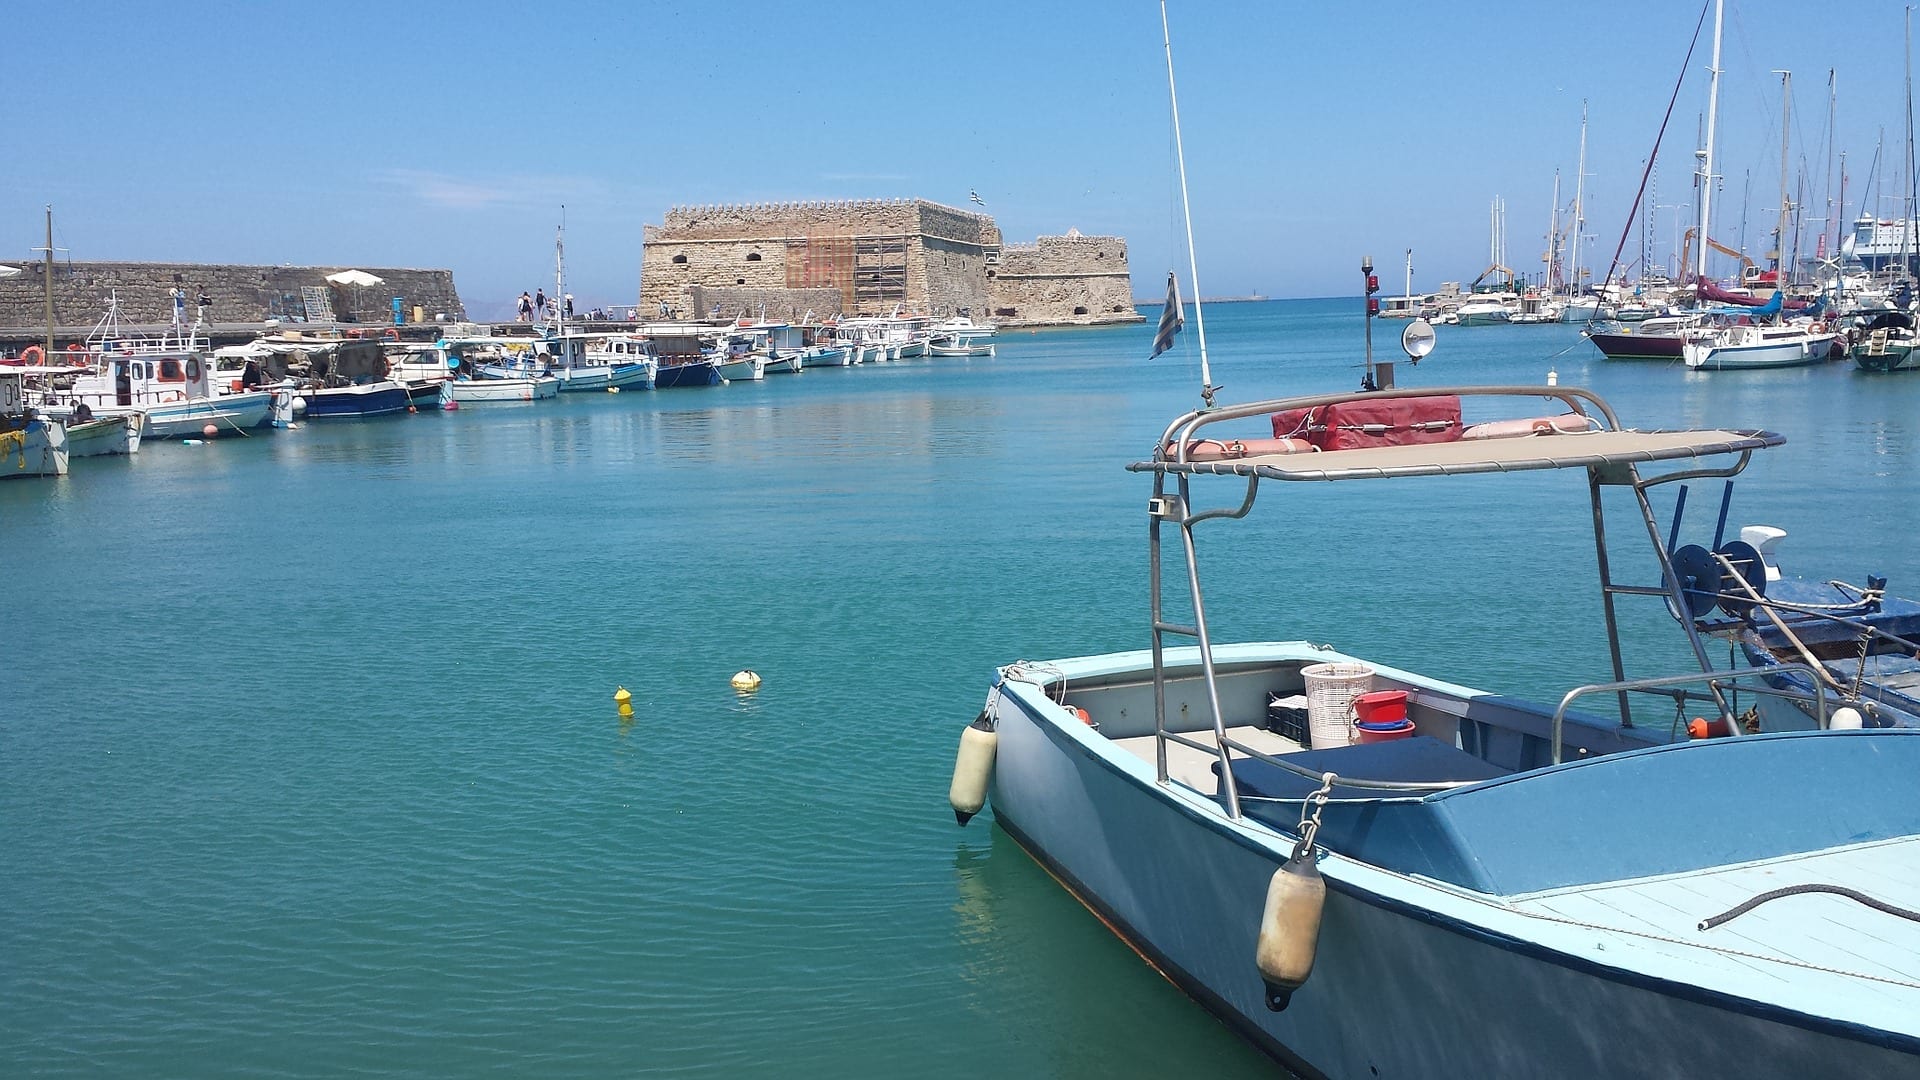 A guide to the best things to see in Heraklion, Crete.